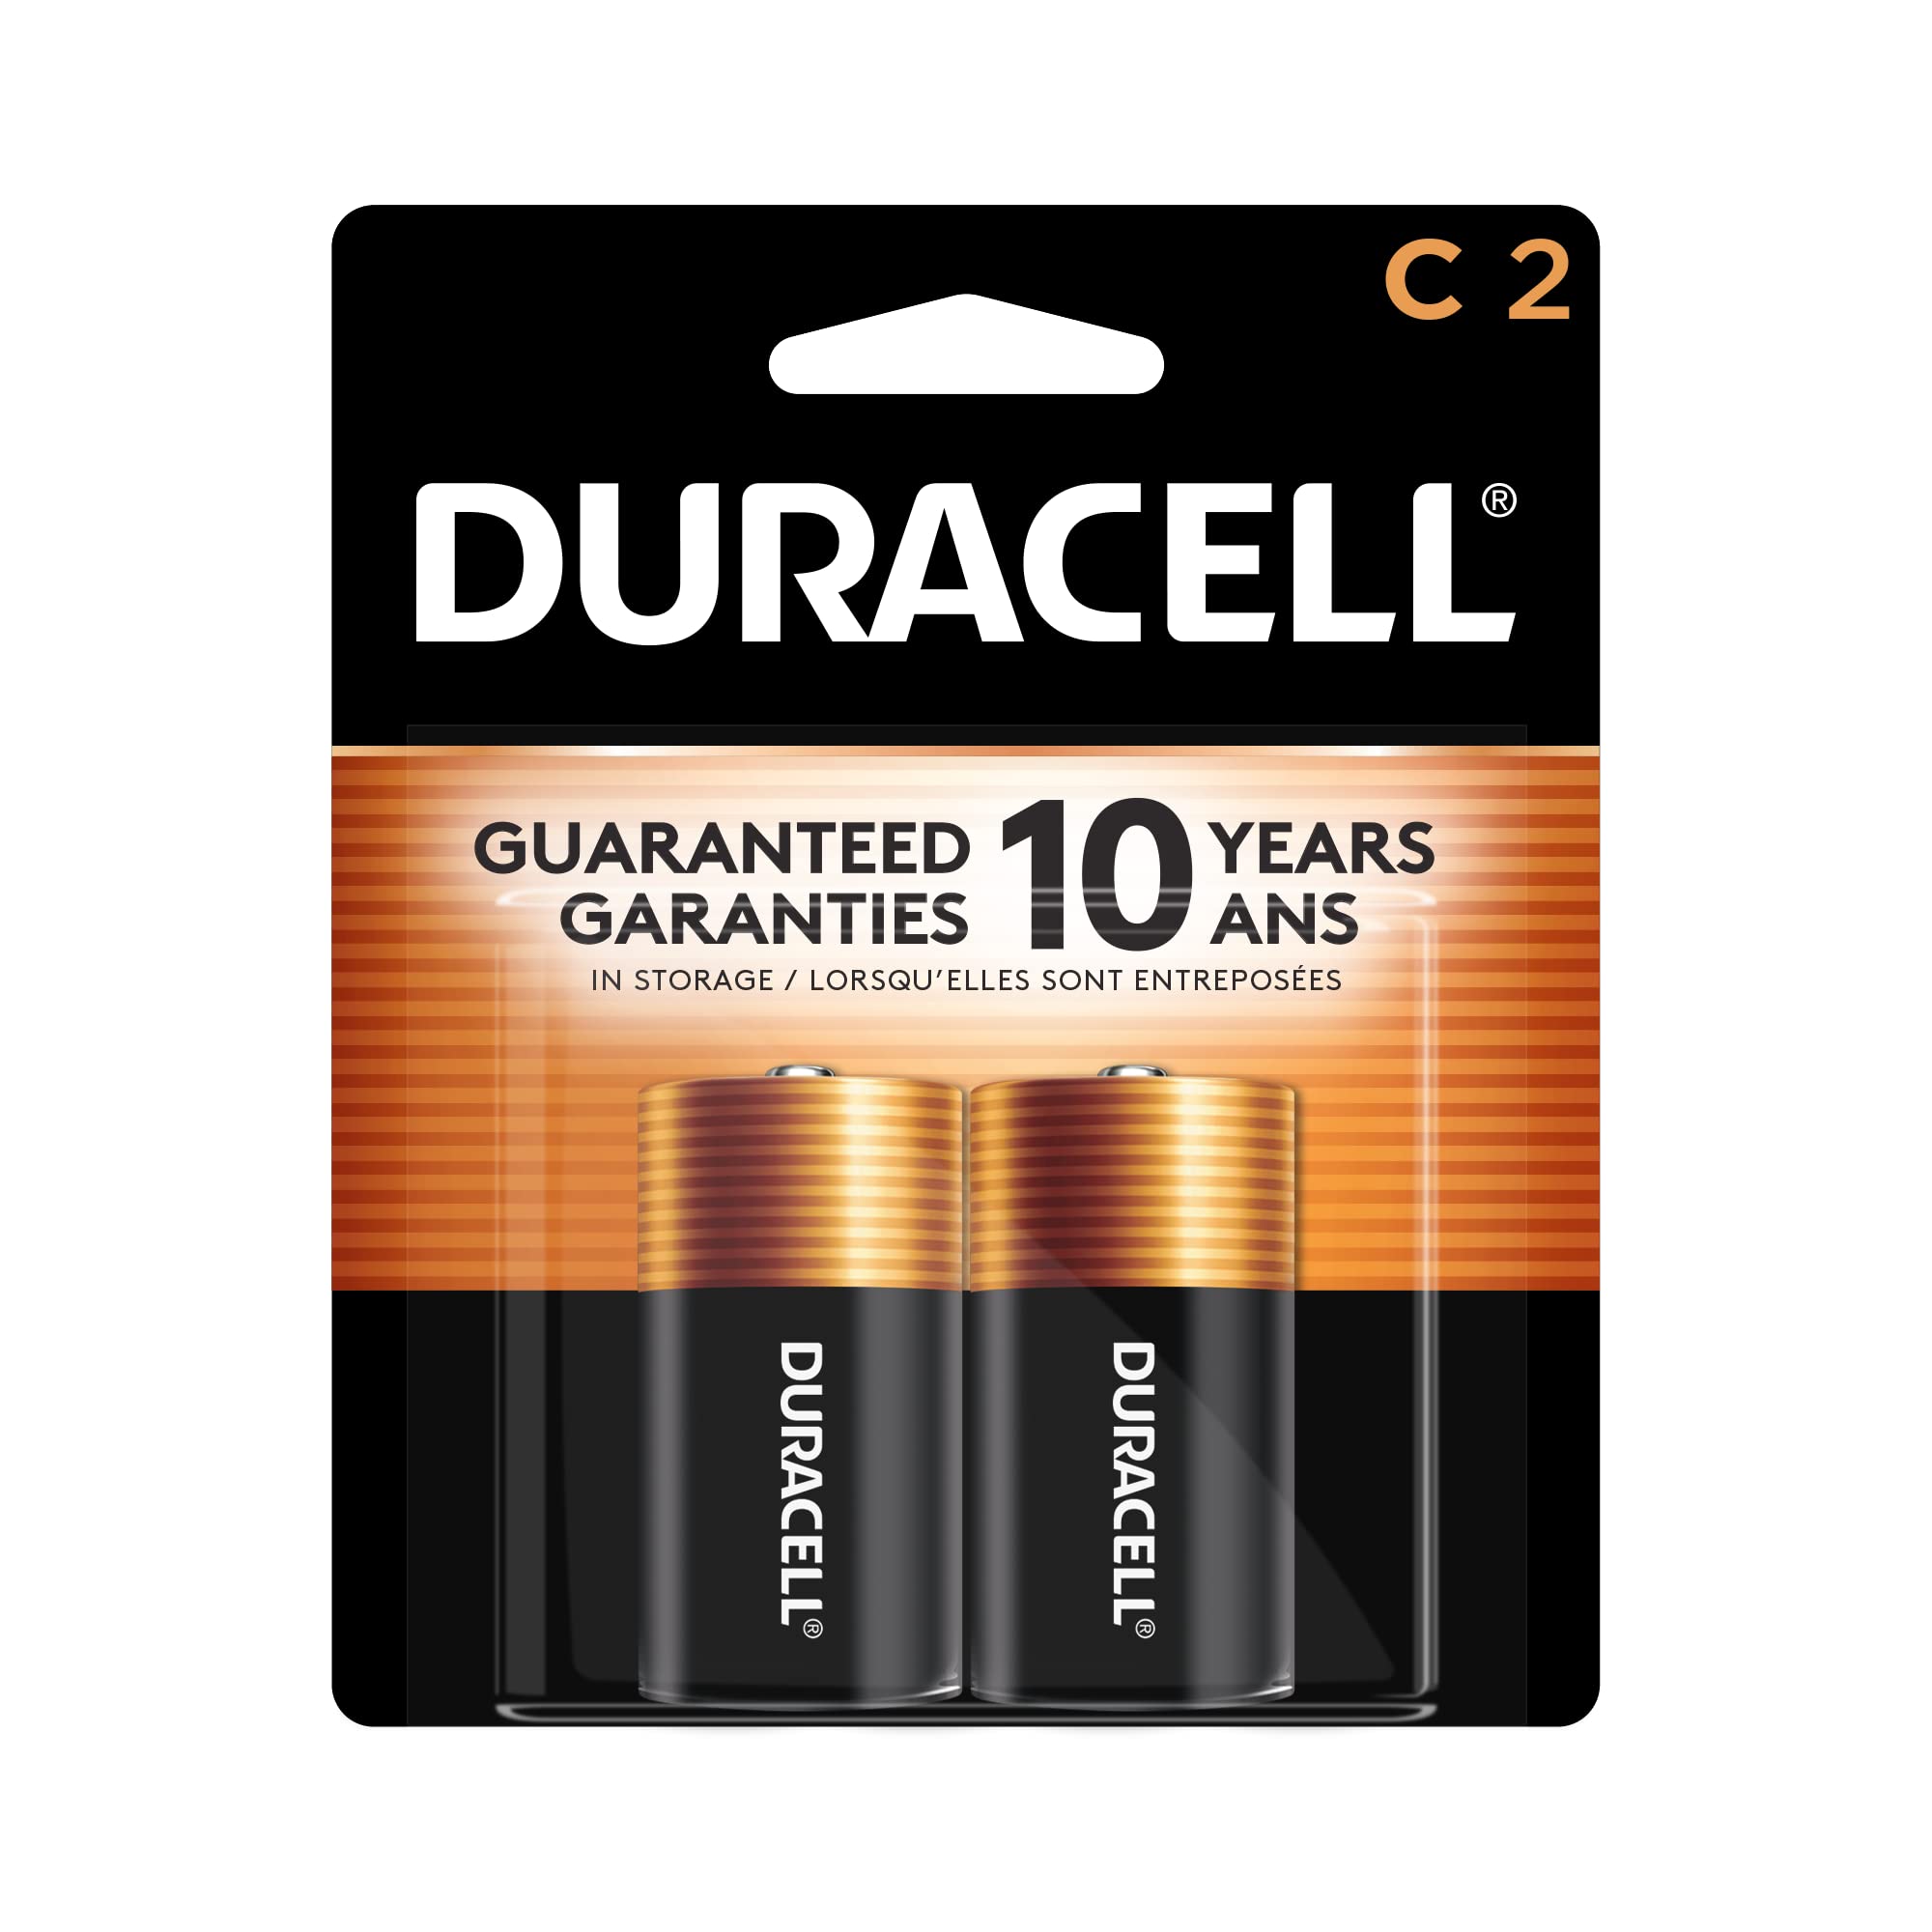 DURACELL Coppertop 1.5V Size C Alkaline Battery, (Pack of 18) - image 1 of 5